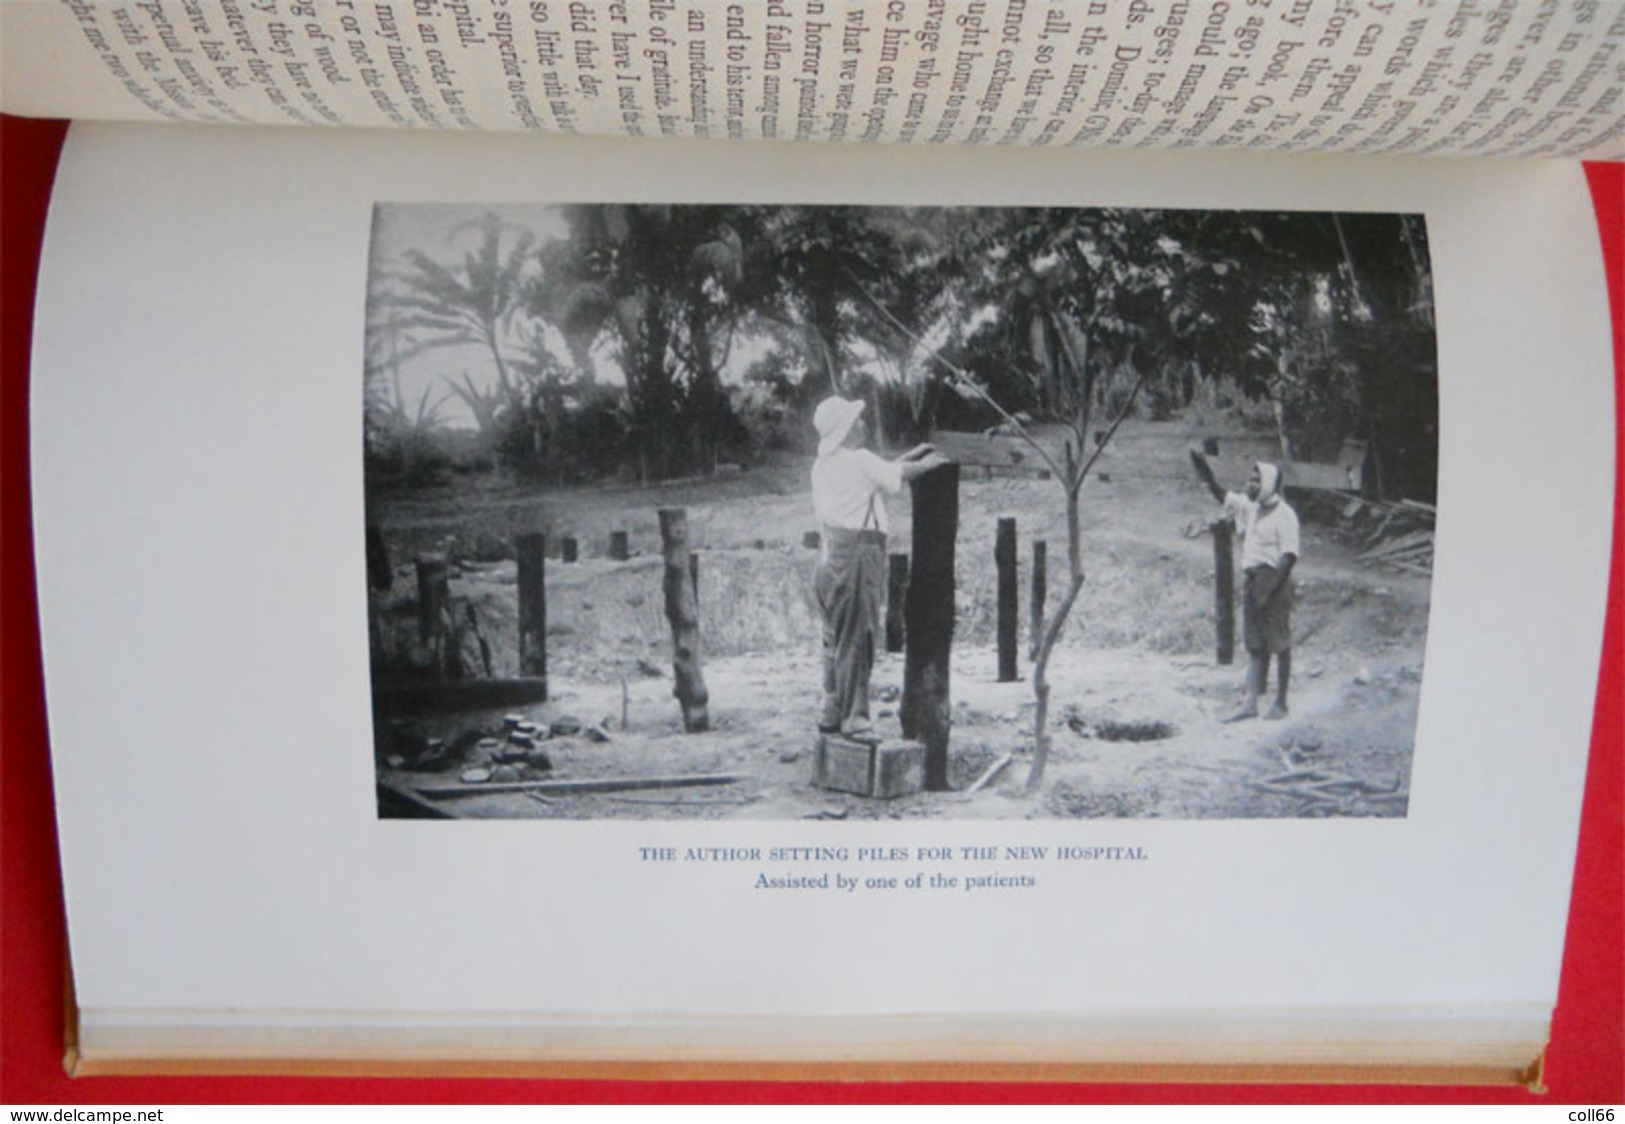 1948 Dr Albert Schweitzer -On the edge ofthe primeval Forest-with 35 photographs édit Adam & Charles Black London